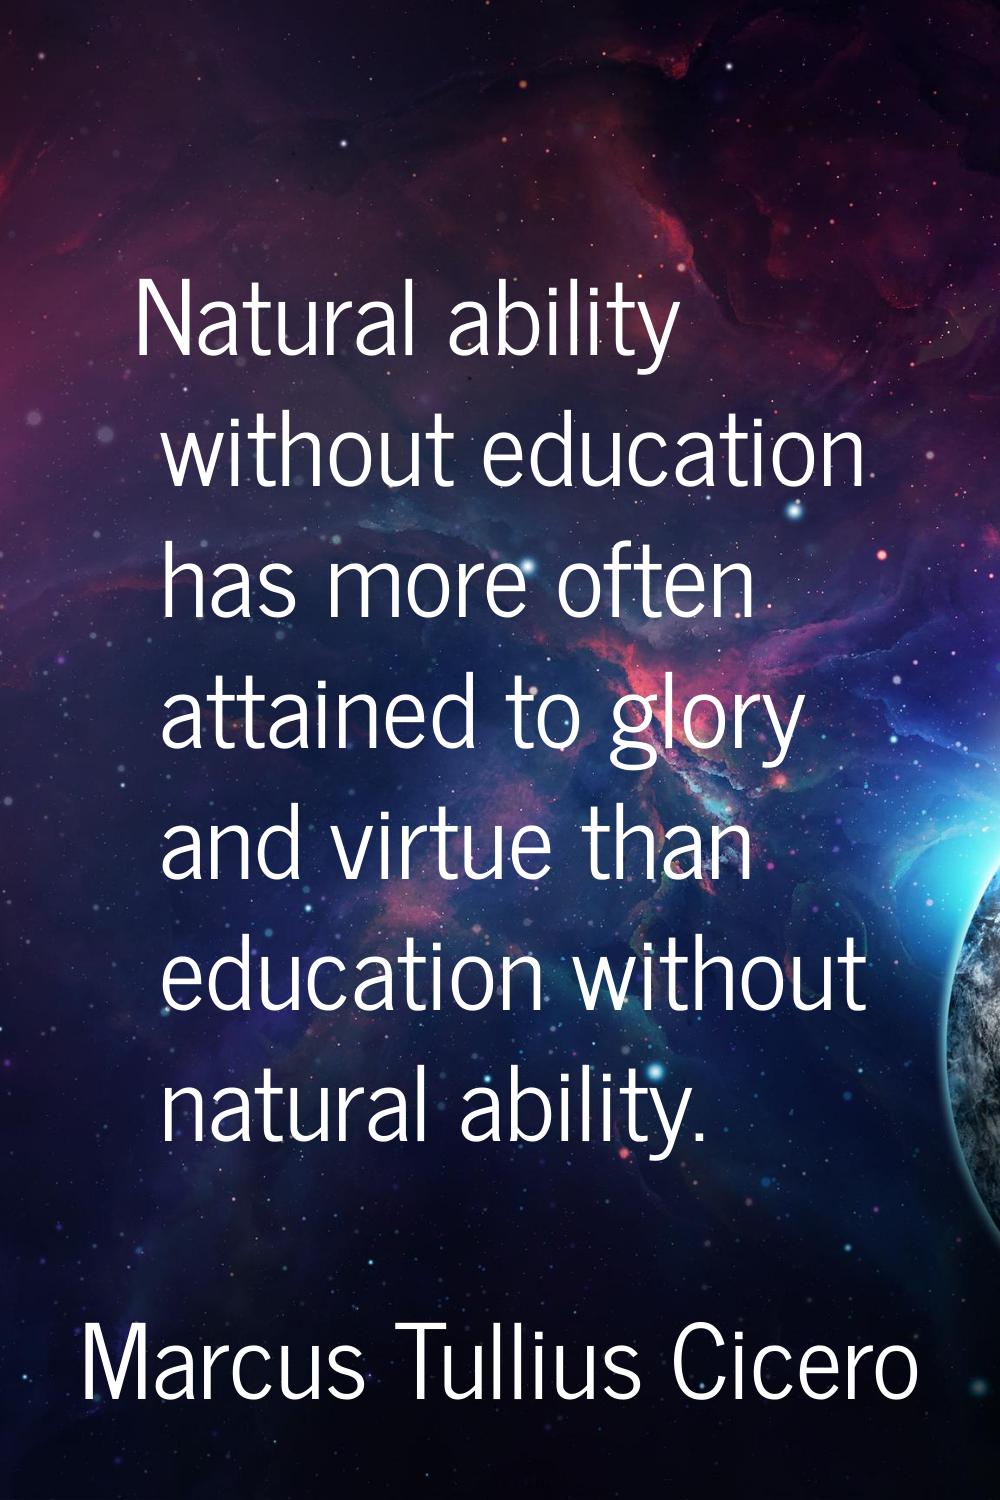 Natural ability without education has more often attained to glory and virtue than education withou